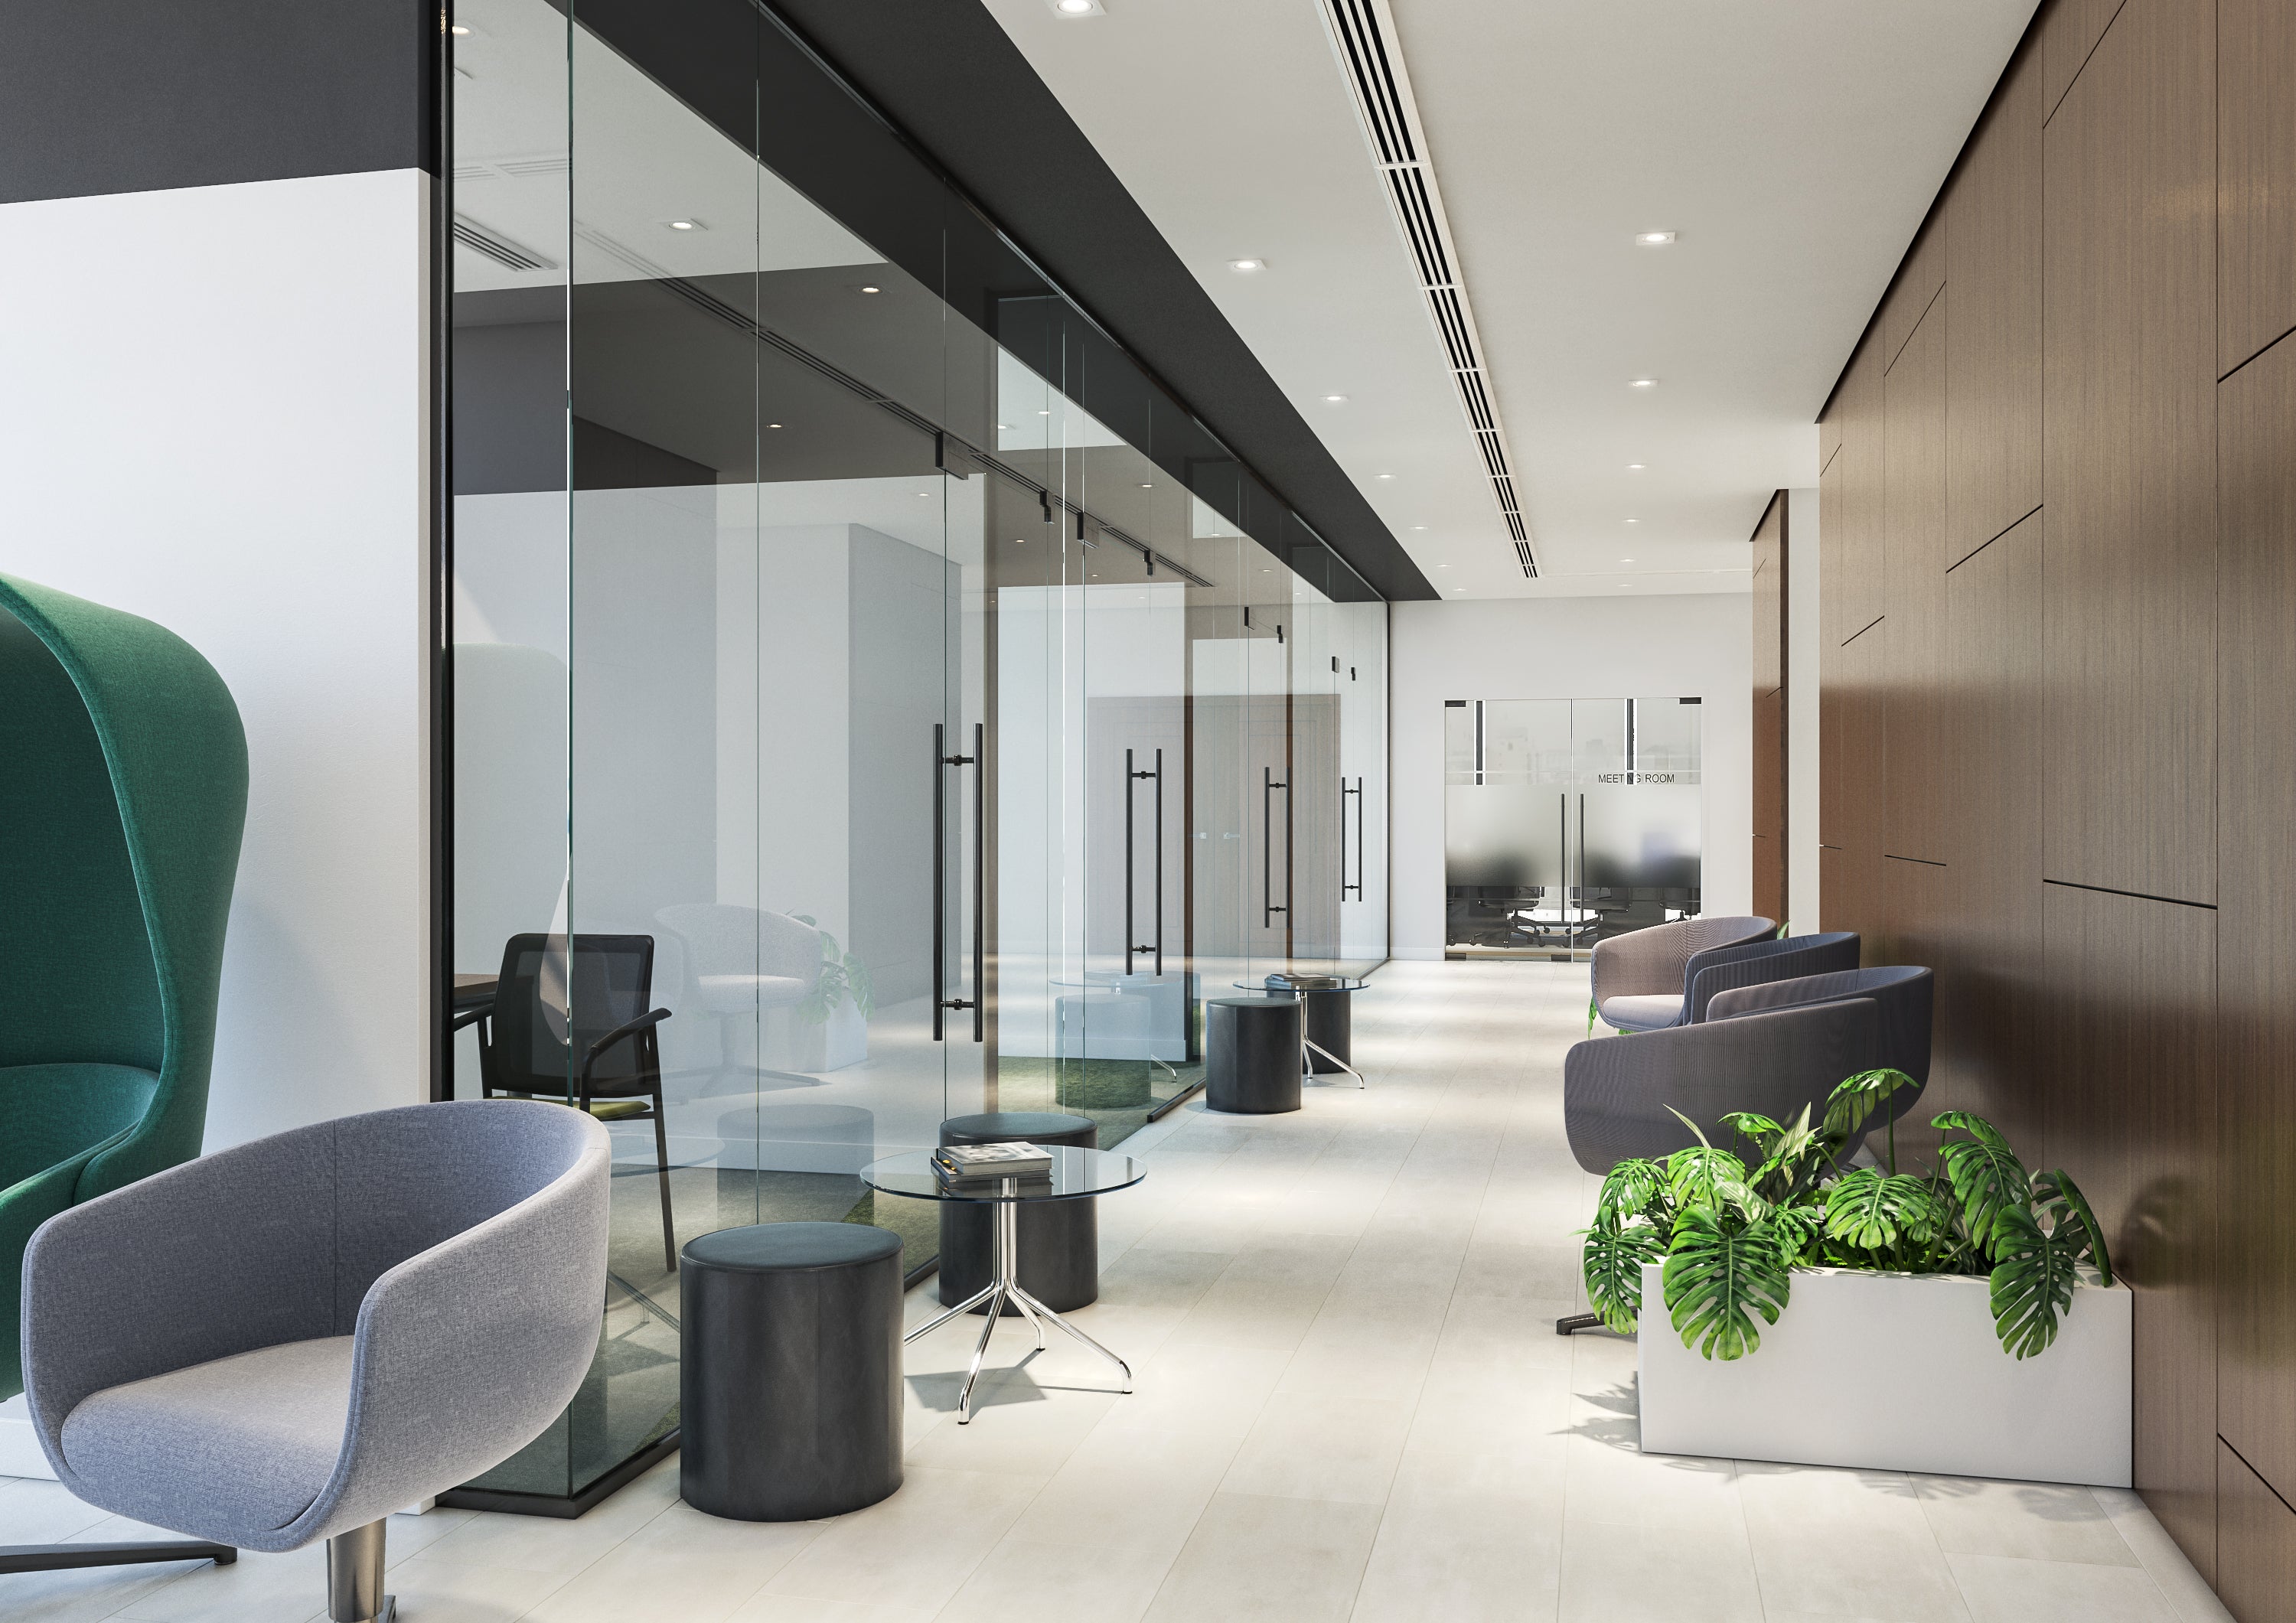 Interior design of a office space by Atelier 21 KSA for the National Dialogue in Saudi Arabia.